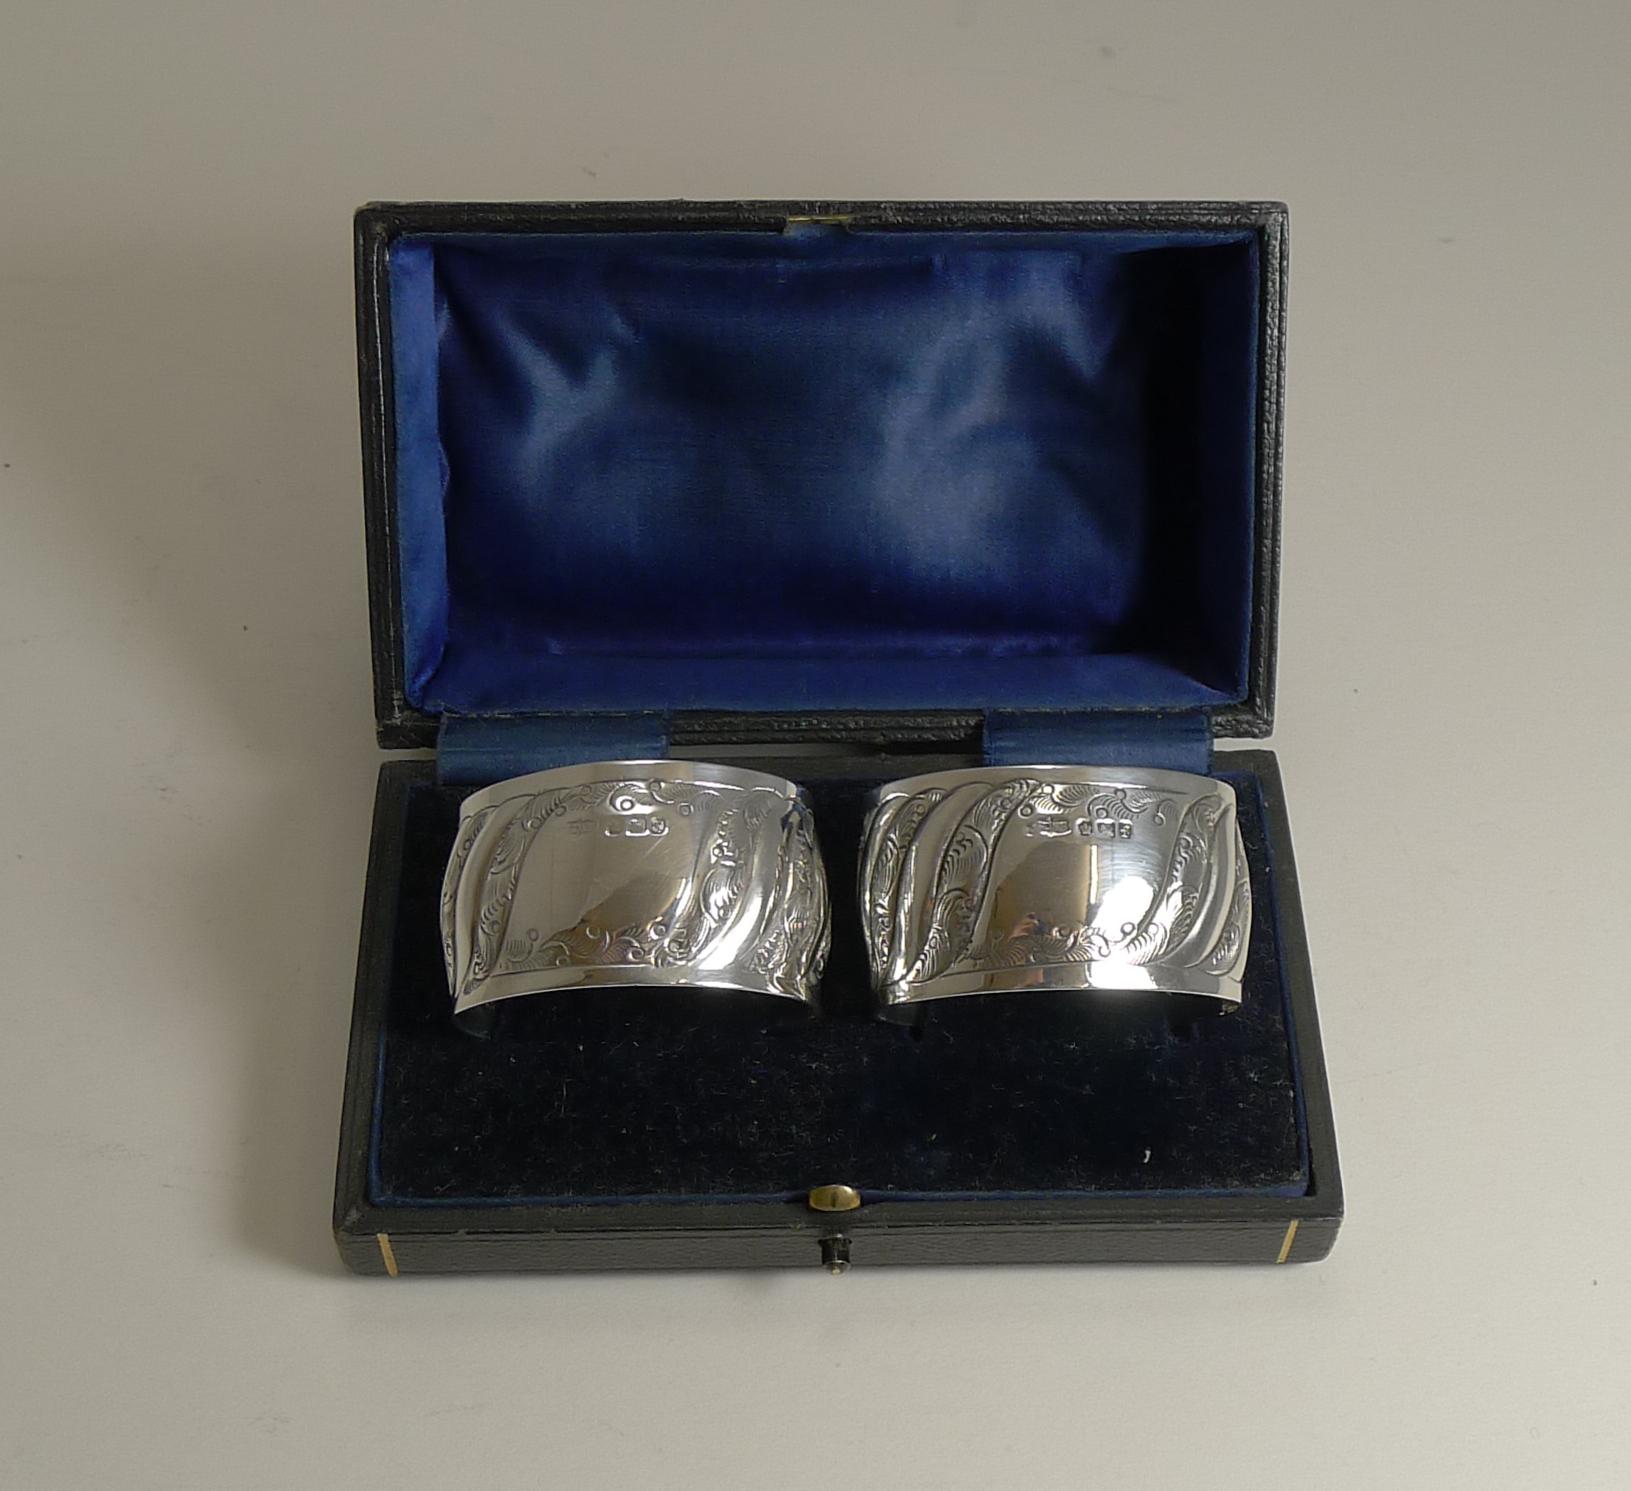 A wonderful pair of late Victorian napkin rings made from English sterling silver with embossed and engraved decoration, each with a vacant cartouche to the front.

Both protected by their original presentation case, each is fully hallmarked for